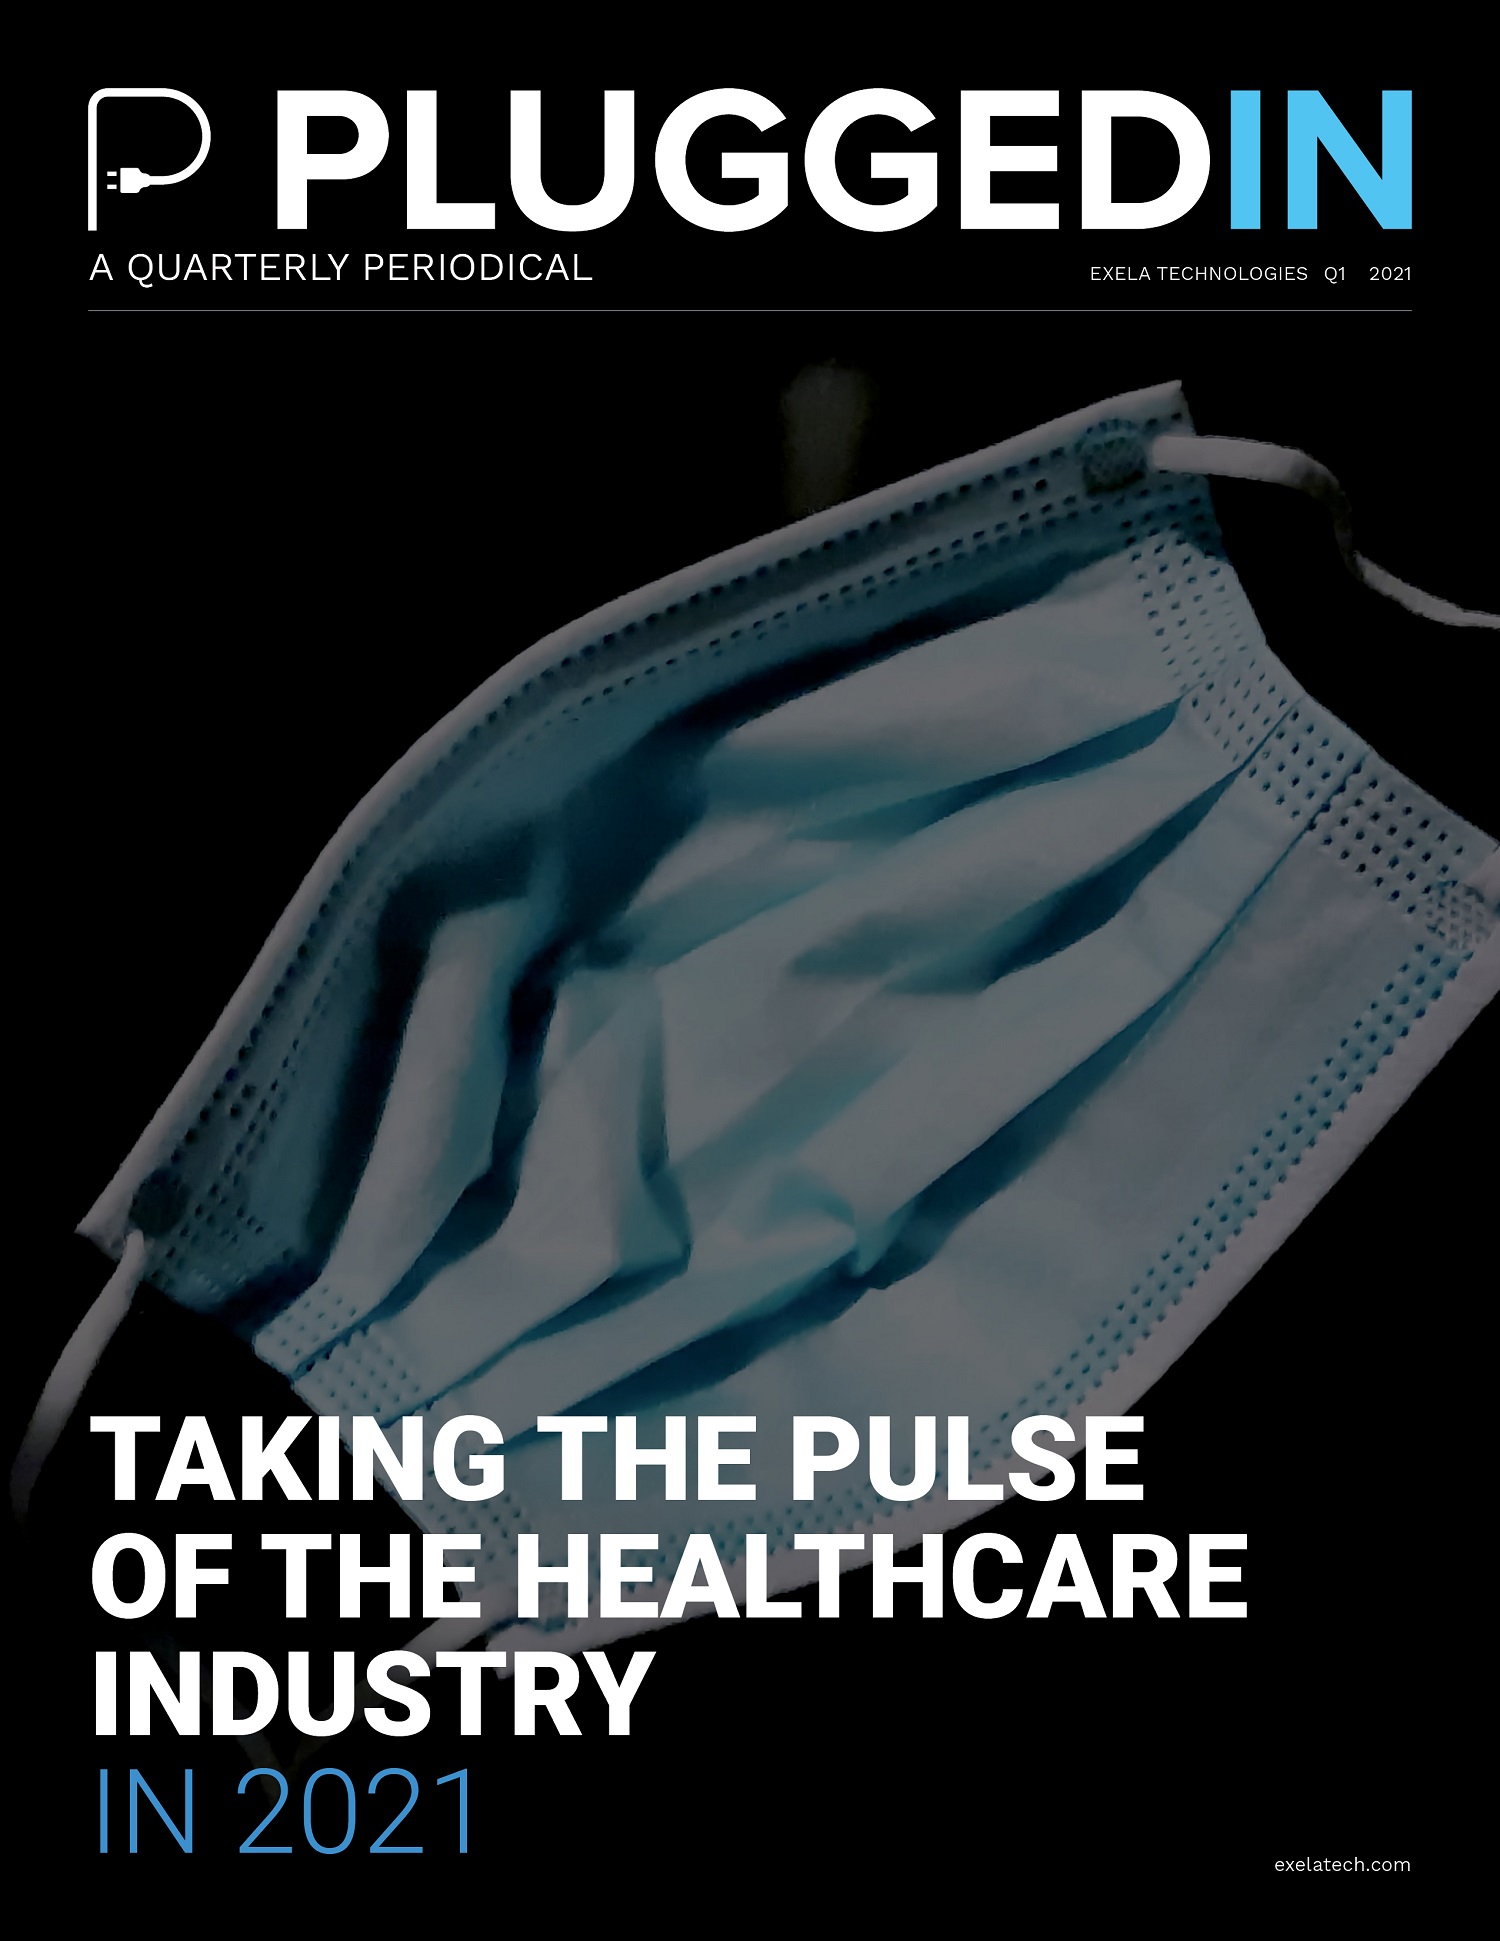 Taking the Pulse of the Healthcare Industry in 2021